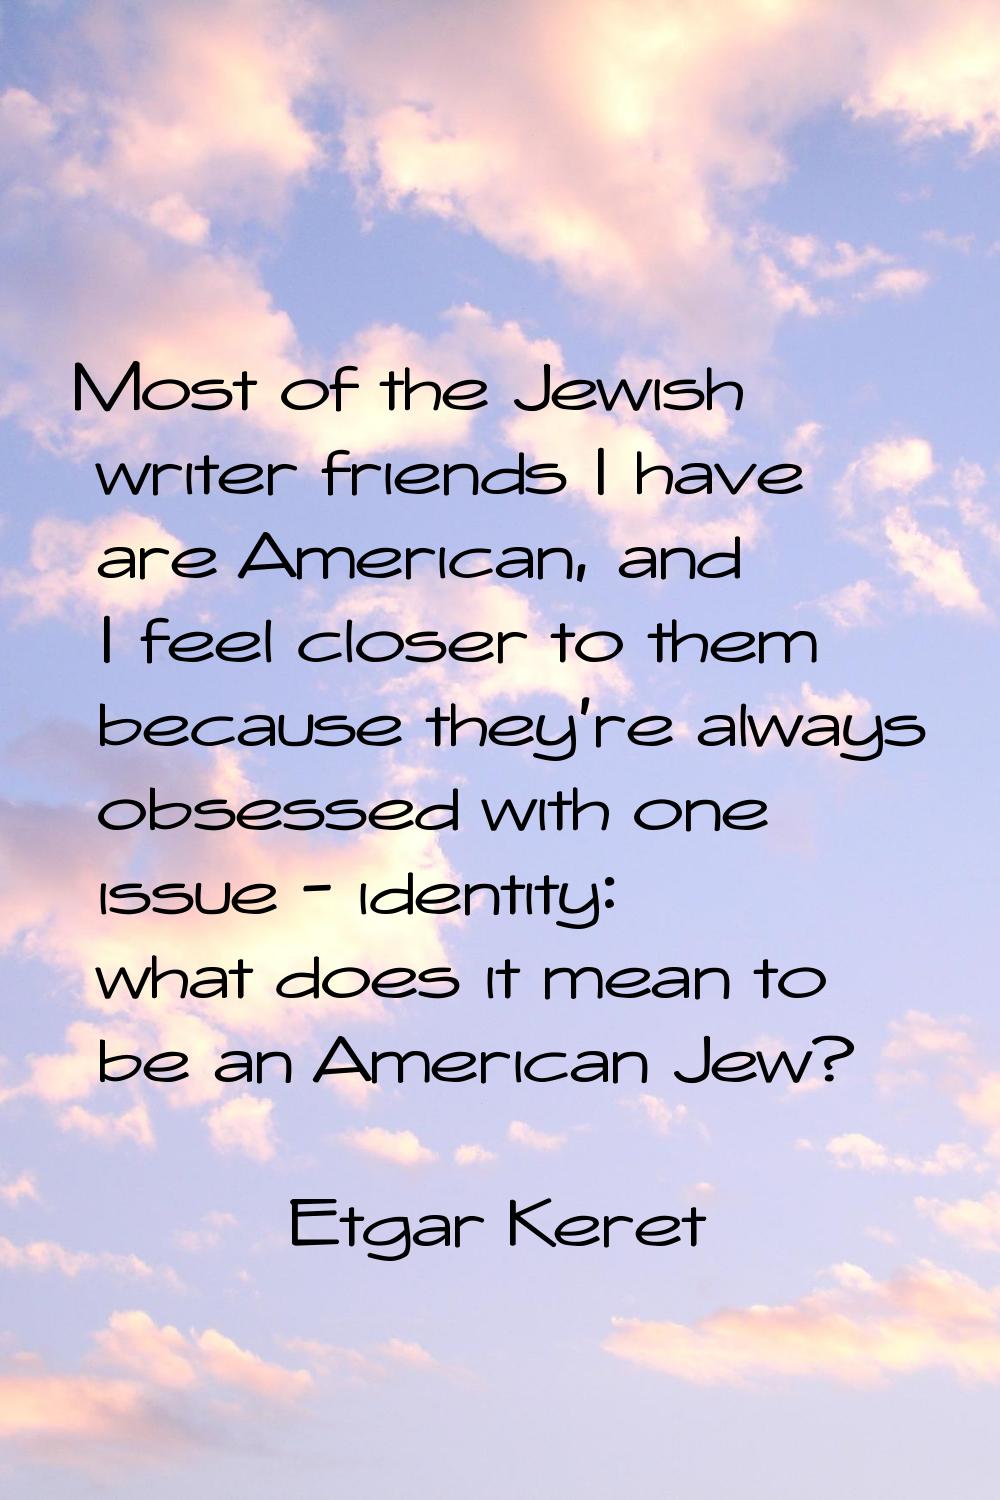 Most of the Jewish writer friends I have are American, and I feel closer to them because they're al